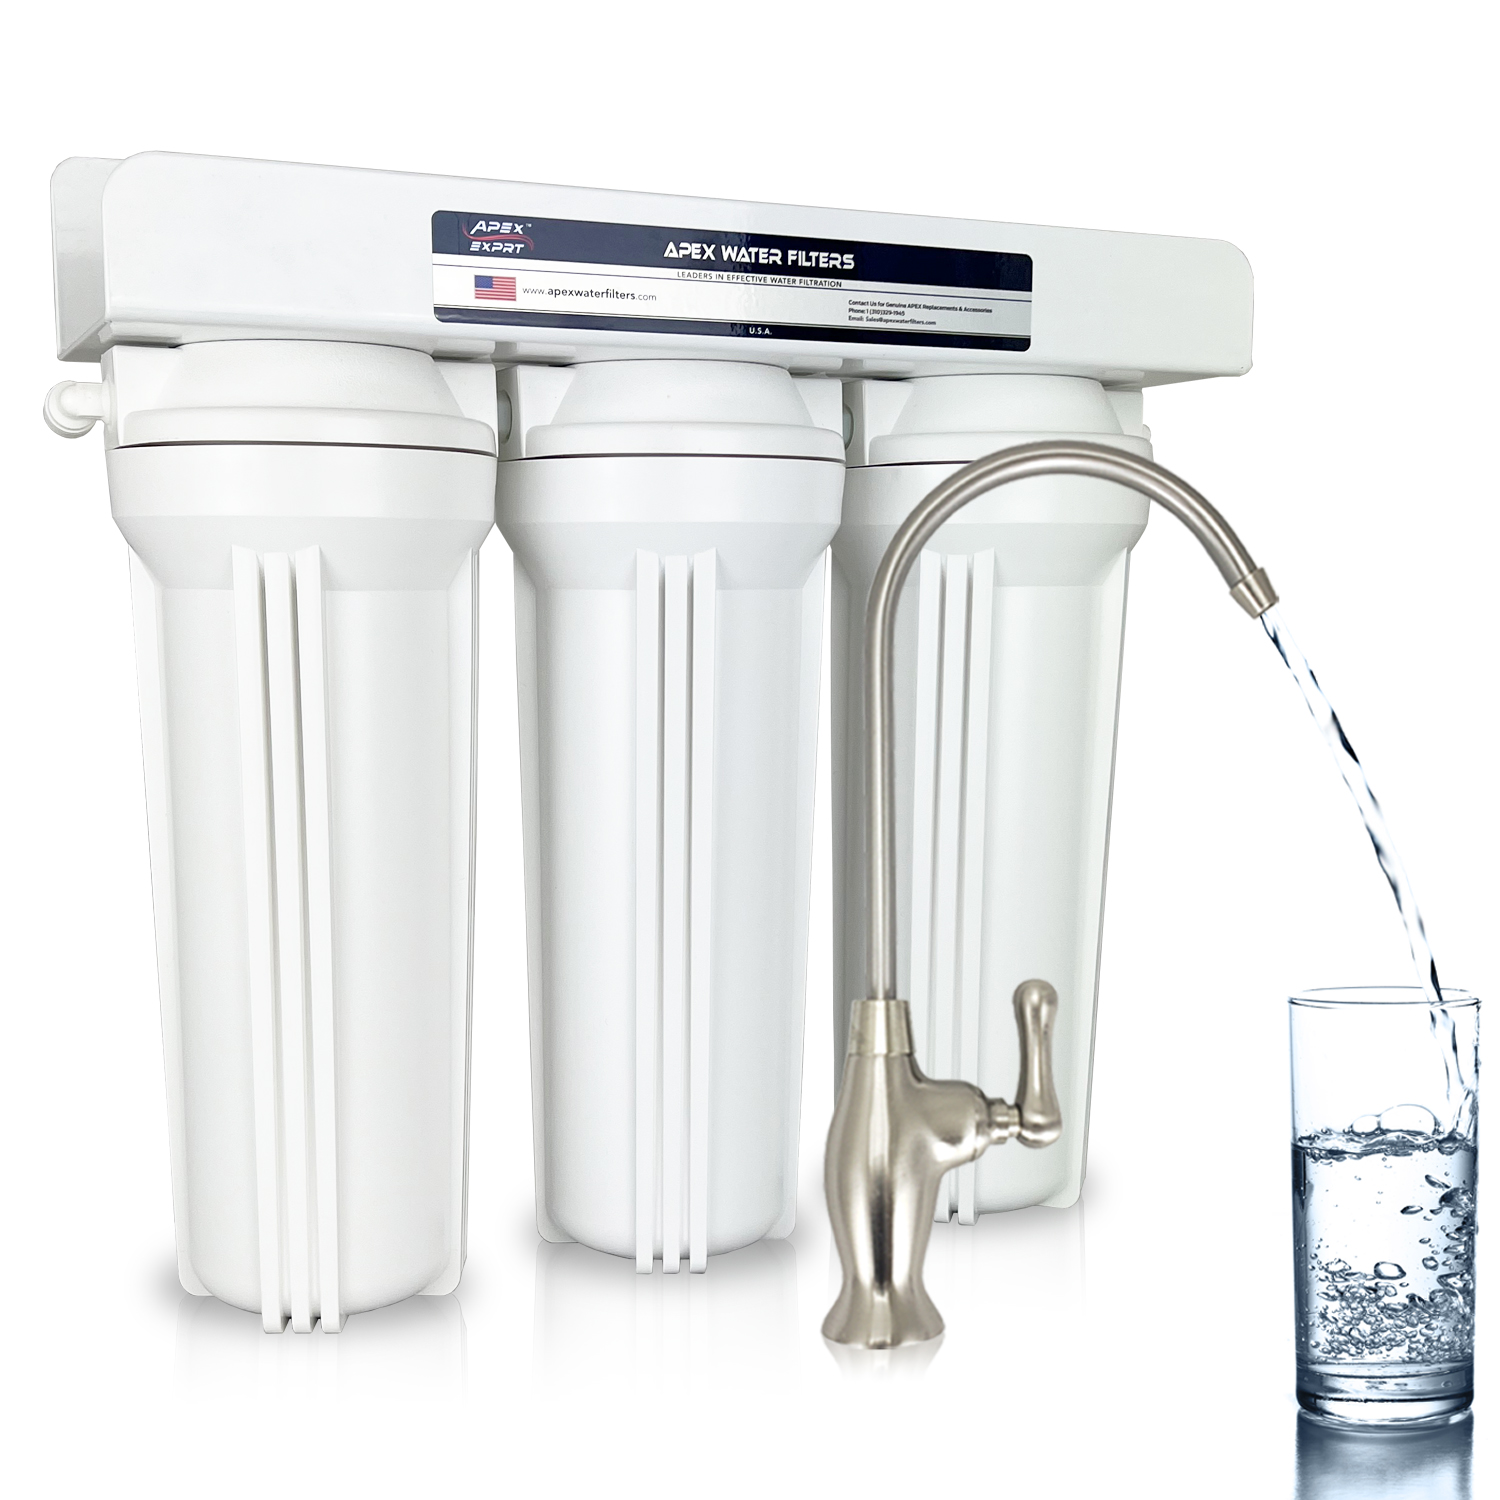 https://apexwaterfilters.com/blogs/wp-content/uploads/2018/07/Cover_photo.jpg